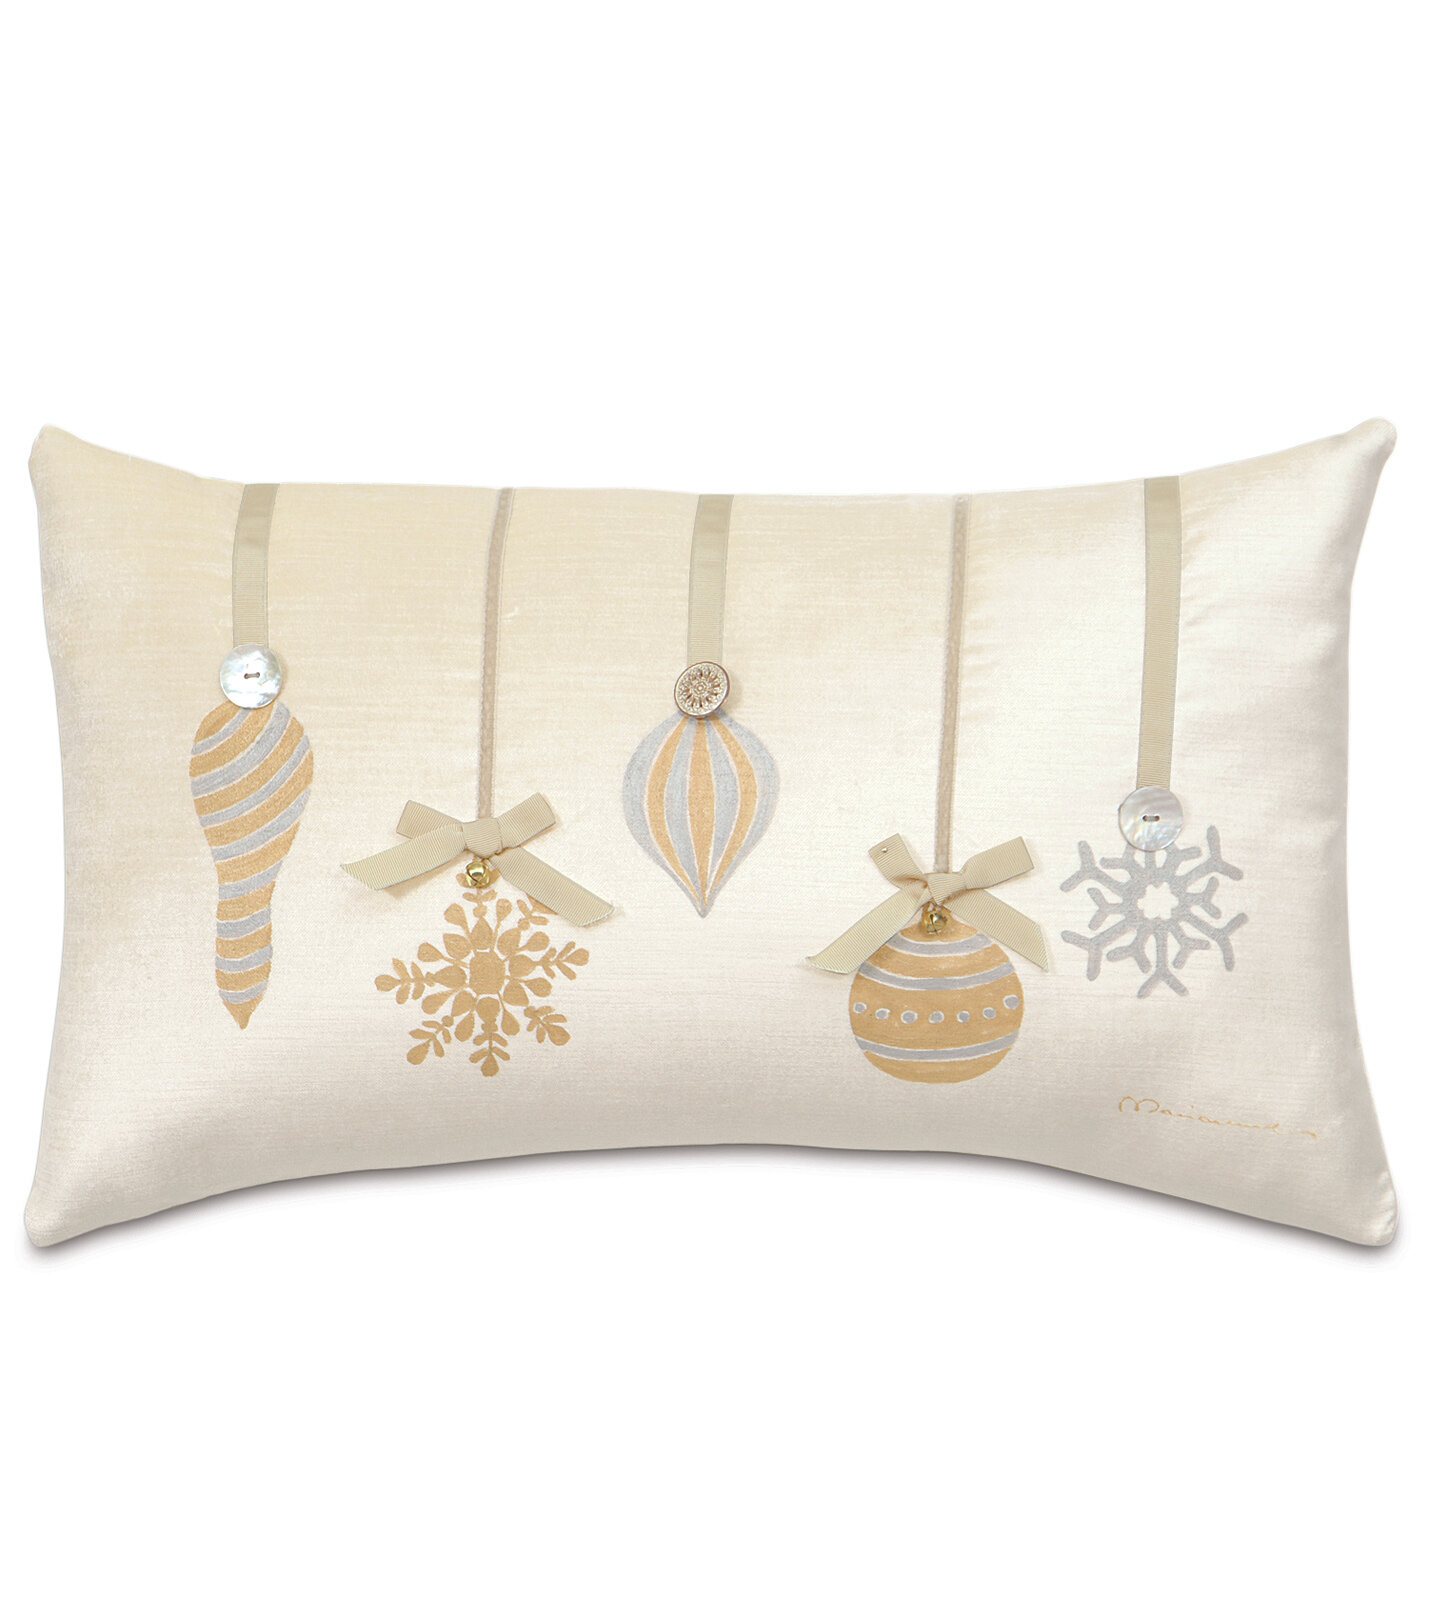 Eastern Accents Holiday Metallic Ornaments Lumbar Pillow Cover & Insert